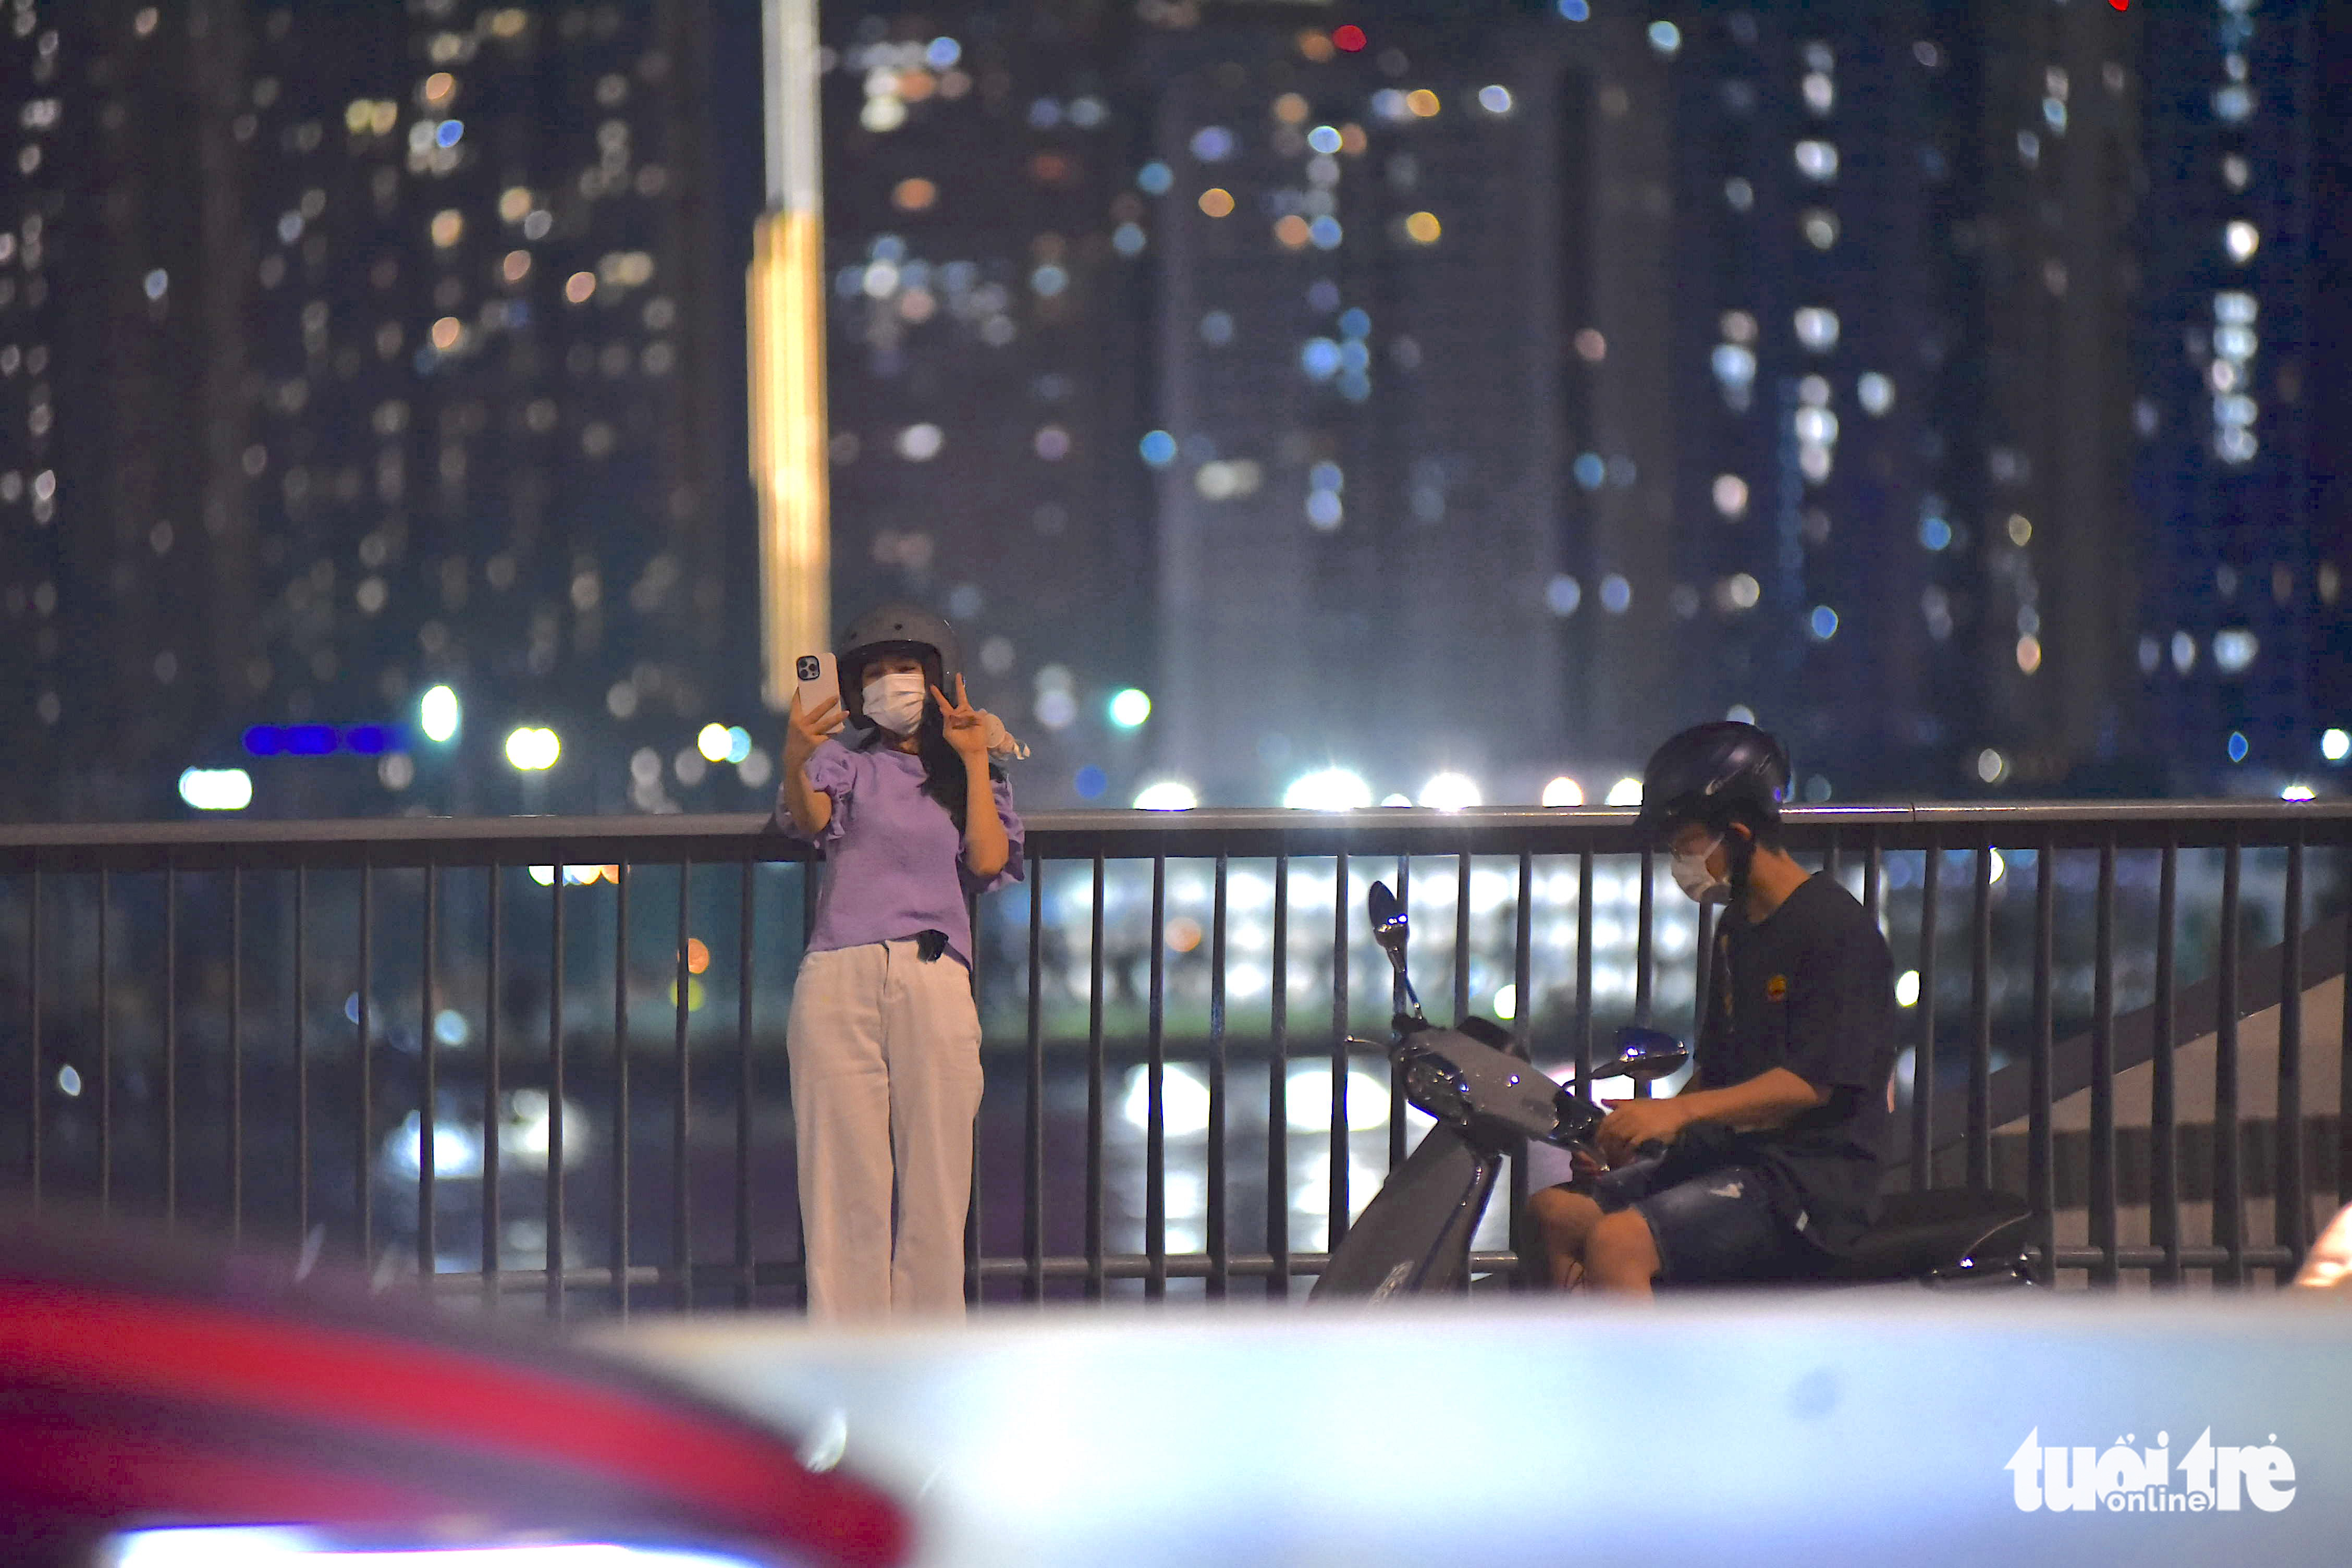 A man illegally parks his motorbike while his friend takes a selfie on the Thu Thiem 2 Bridge in District 1, Ho Chi Minh City. Photo: Ngoc Phuong / Tuoi Tre